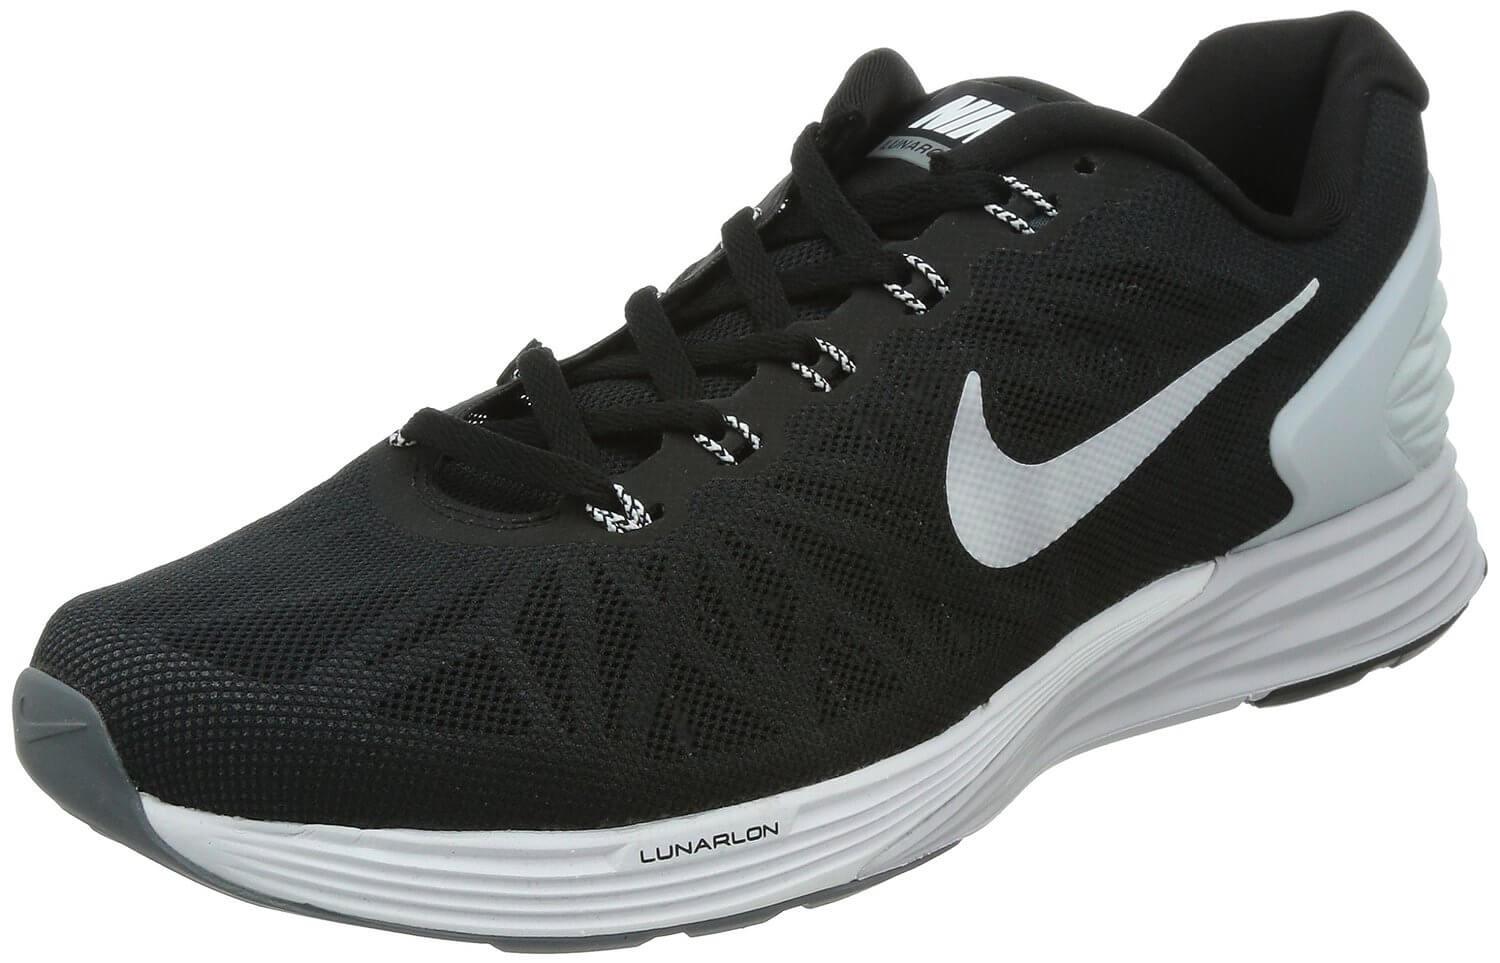 the Nike LunarGlide 6 is a great everyday running shoe, especially for runners with overpronation issues